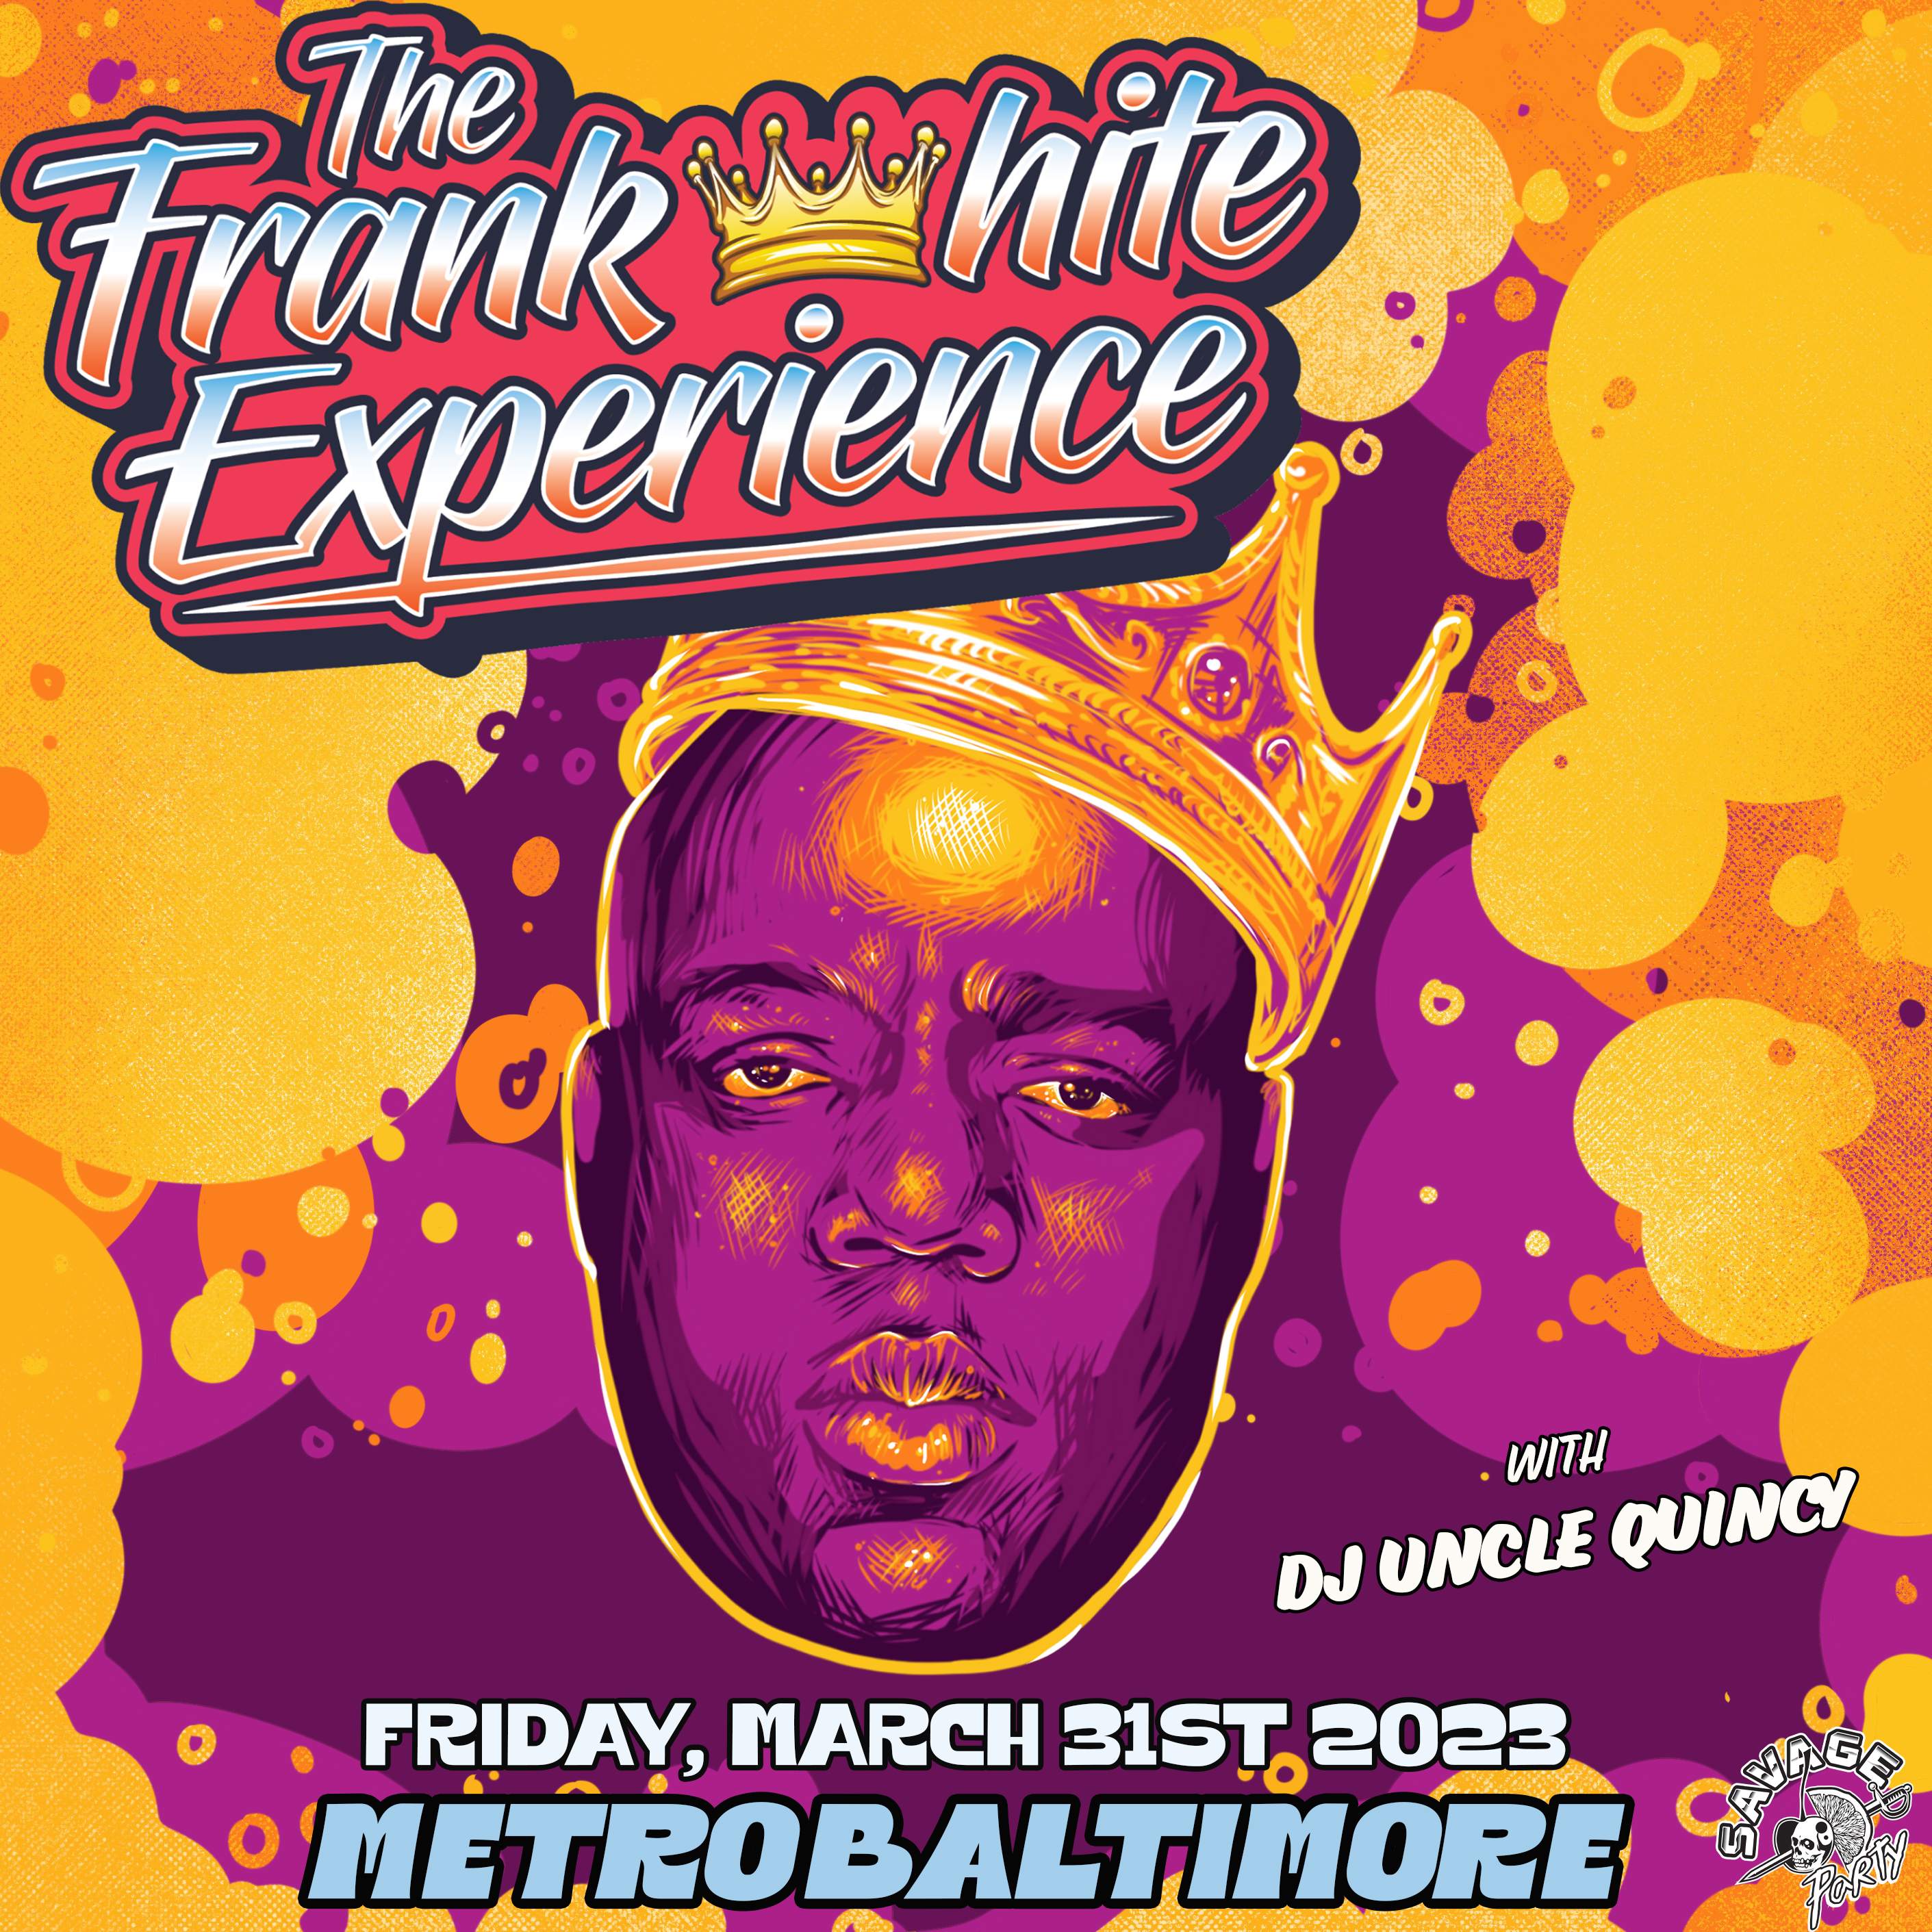 THE FRANK WHITE EXPERIENCE - Official Biggie Smalls Tribute Band, with DJ Uncle Quincy - Página frontal